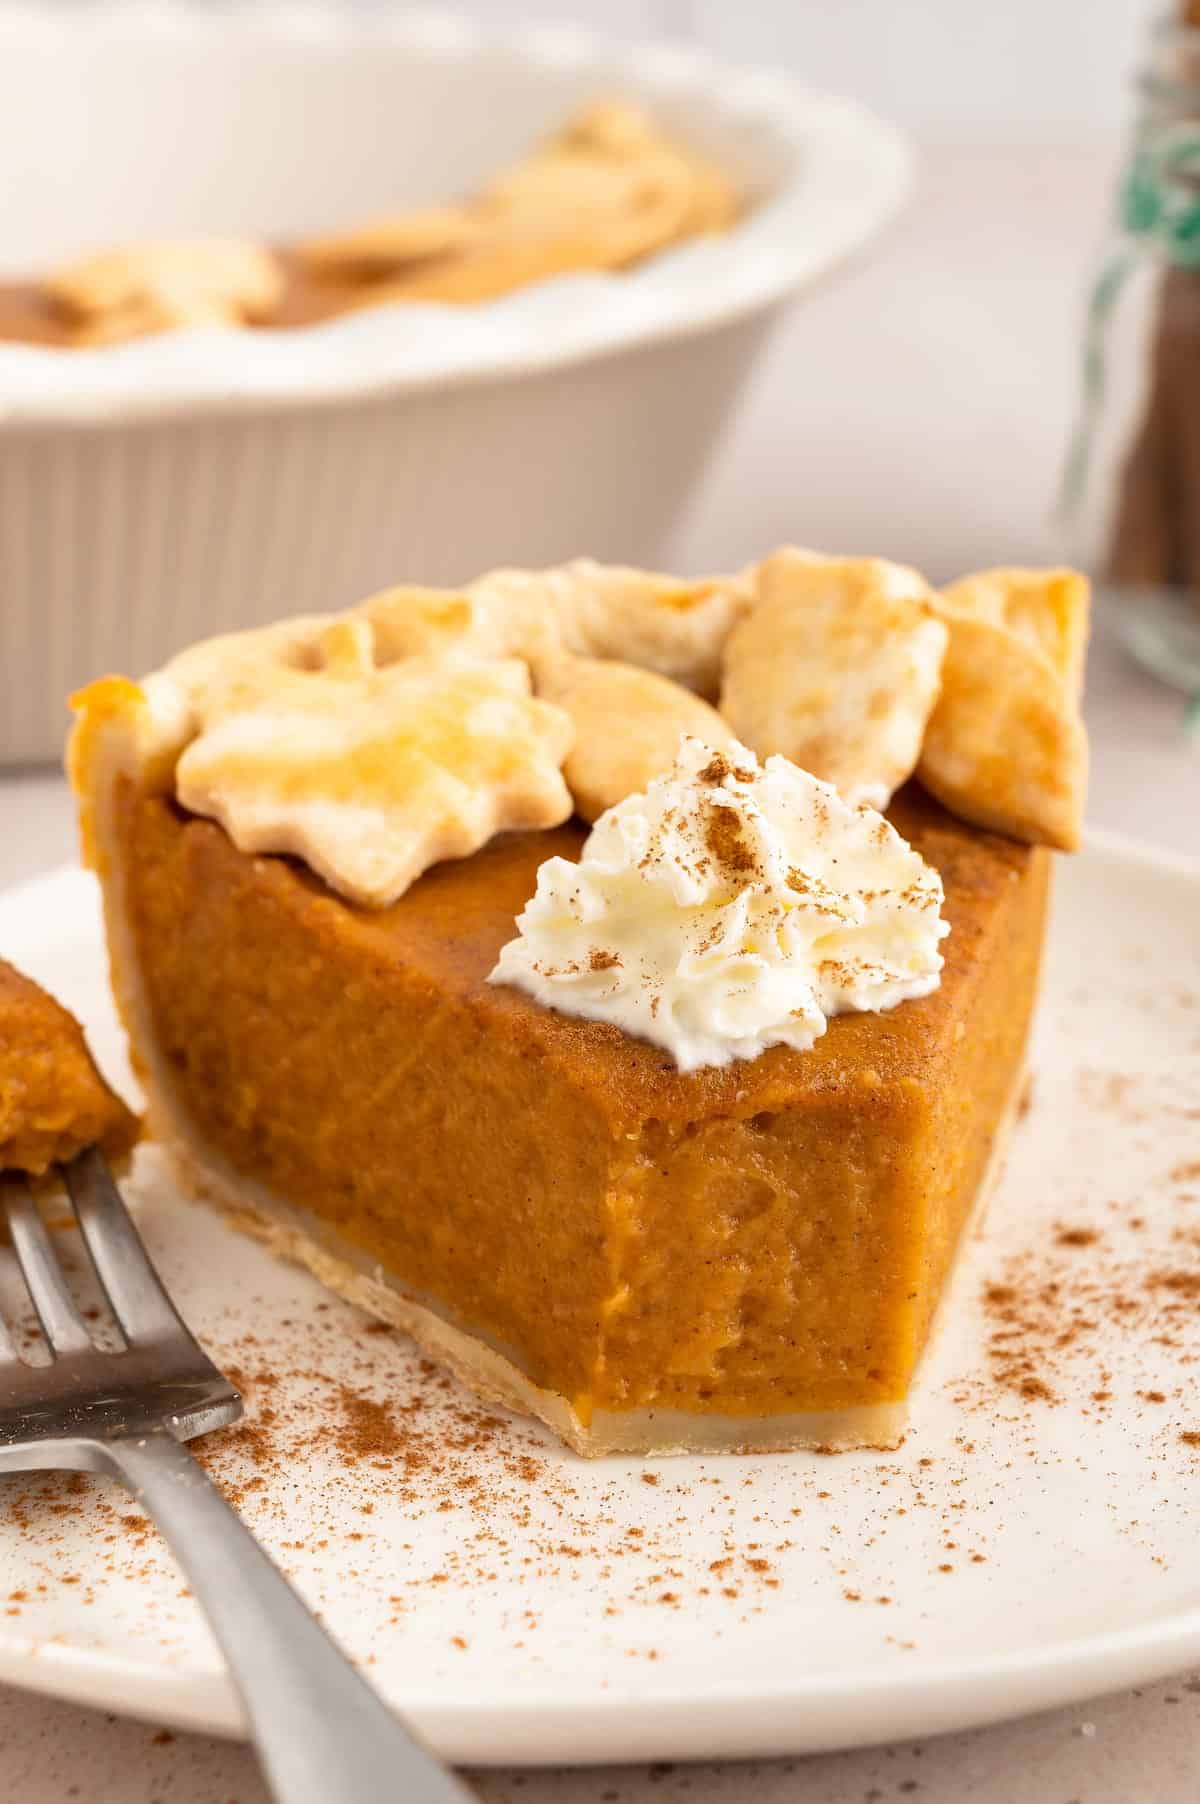 Vegan sweet potato pie on a plate and decorated with pastry leaves and topped with coconut whipped cream and a bite missing.